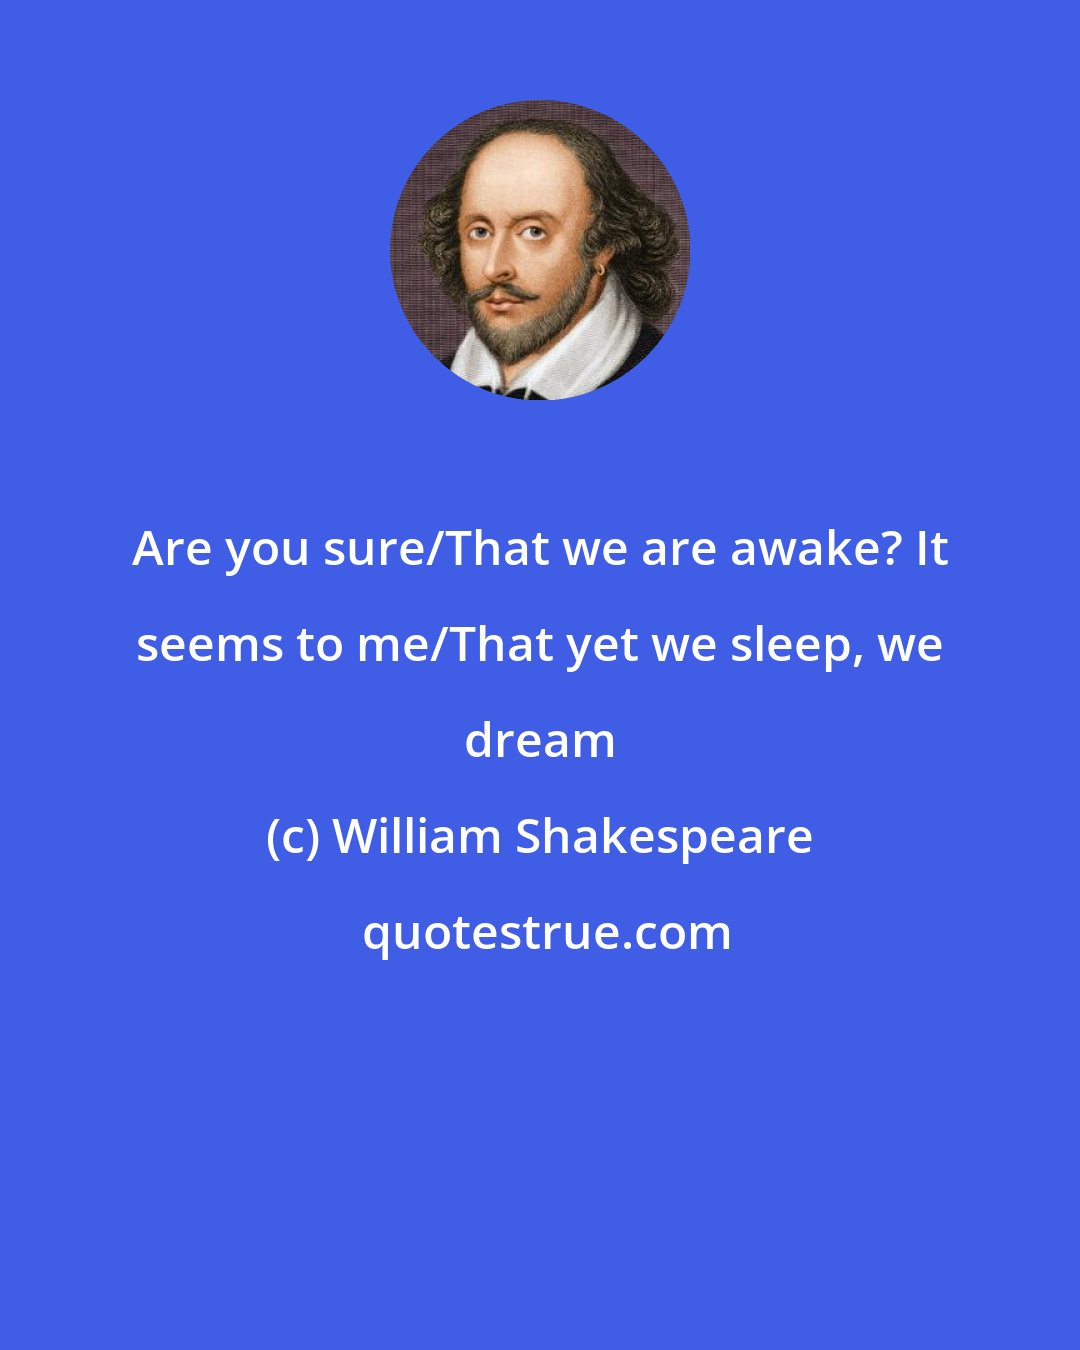 William Shakespeare: Are you sure/That we are awake? It seems to me/That yet we sleep, we dream